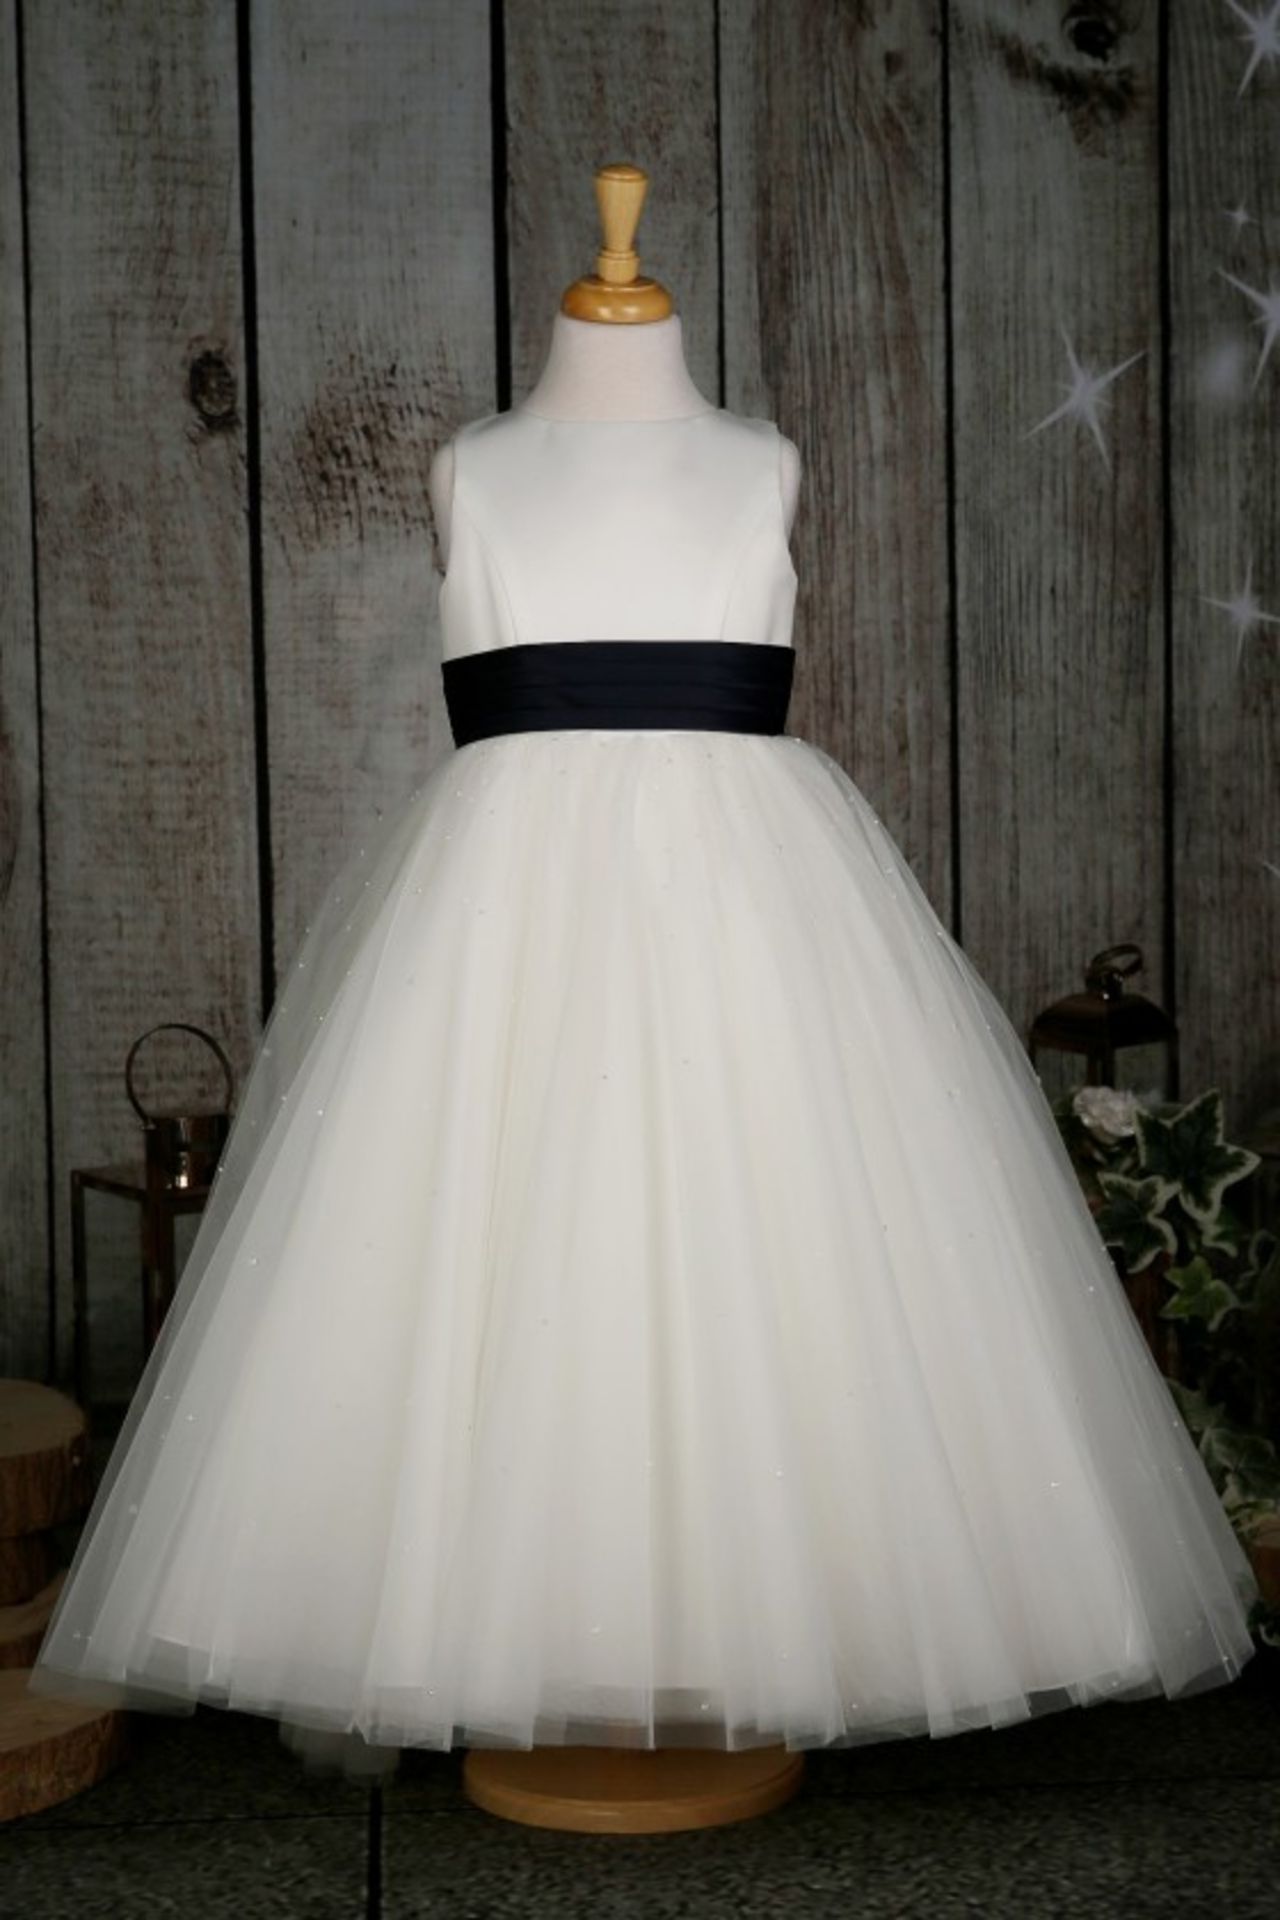 Richard Designs Flowergirl Dresses x 8 Mixed Colours and Sizes - Image 7 of 7